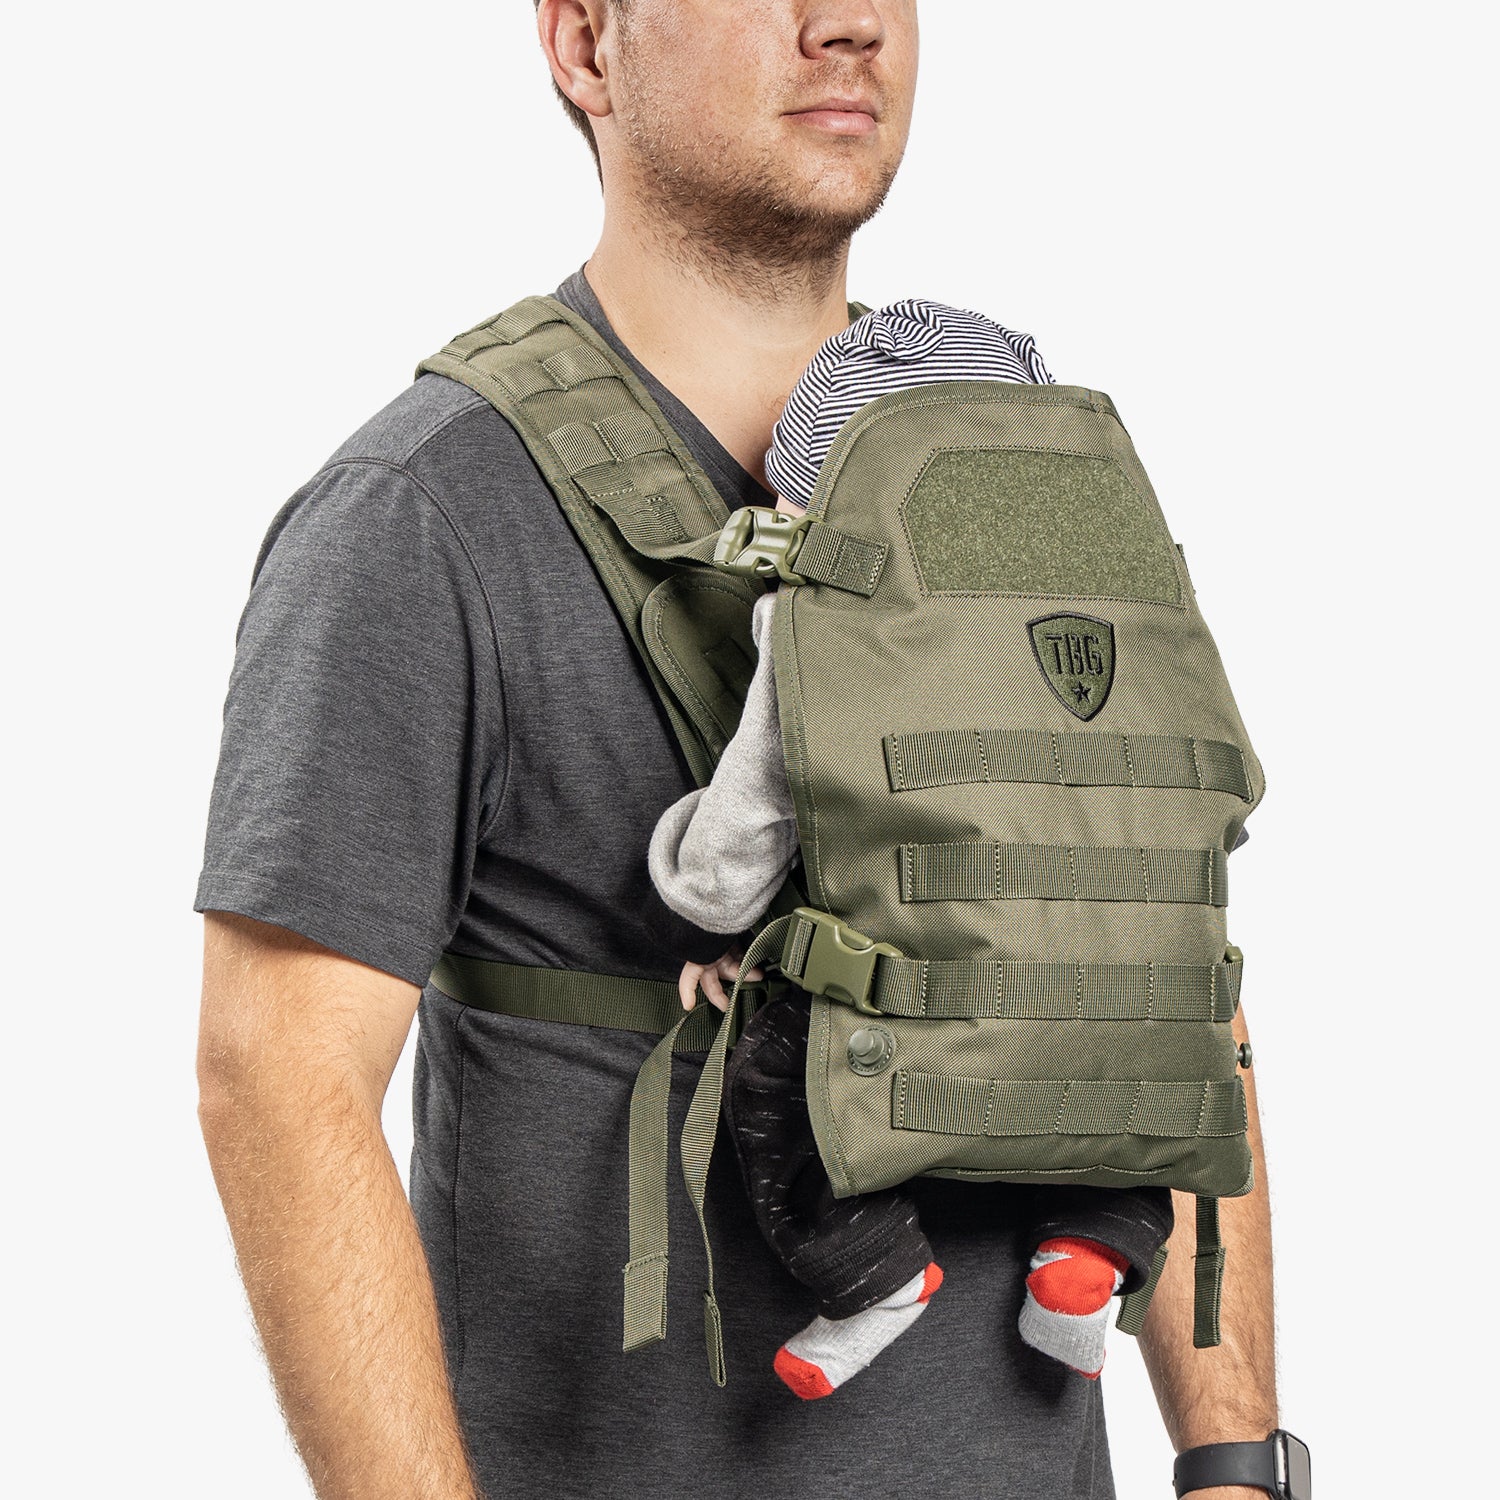 tactical baby carrier